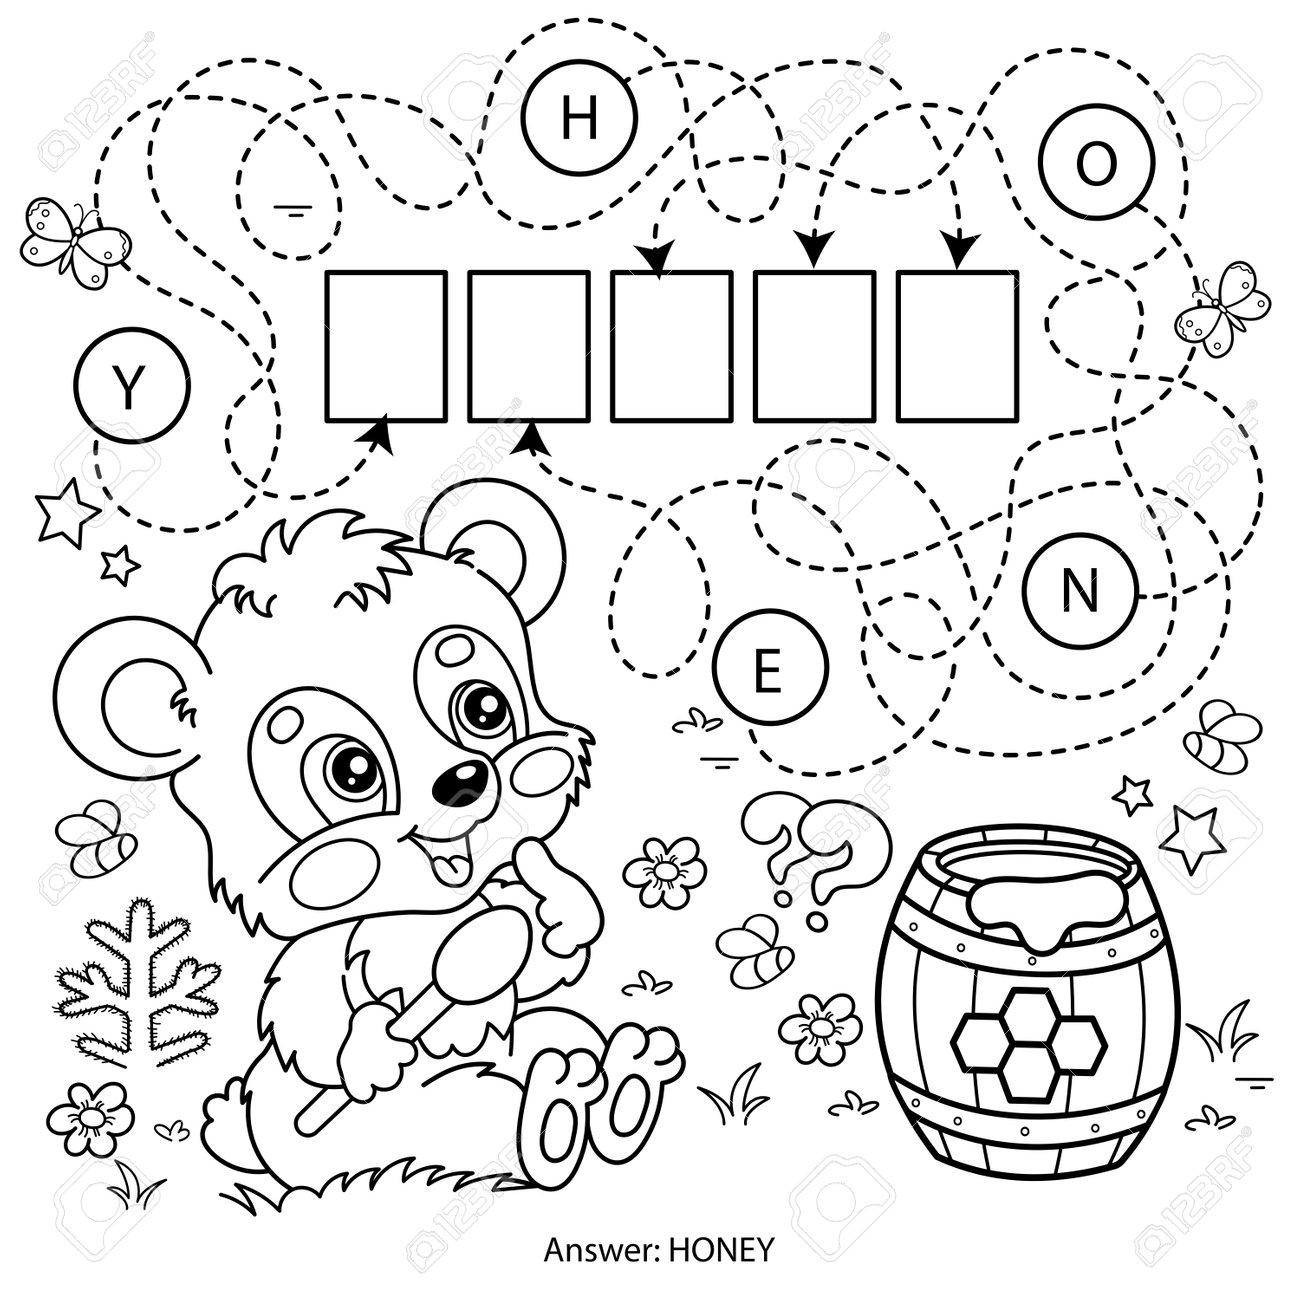 Maze or labyrinth game puzzle coloring page outline of cartoon little bear cub with barrel of honey coloring book for kids royalty free svg cliparts vectors and stock illustration image